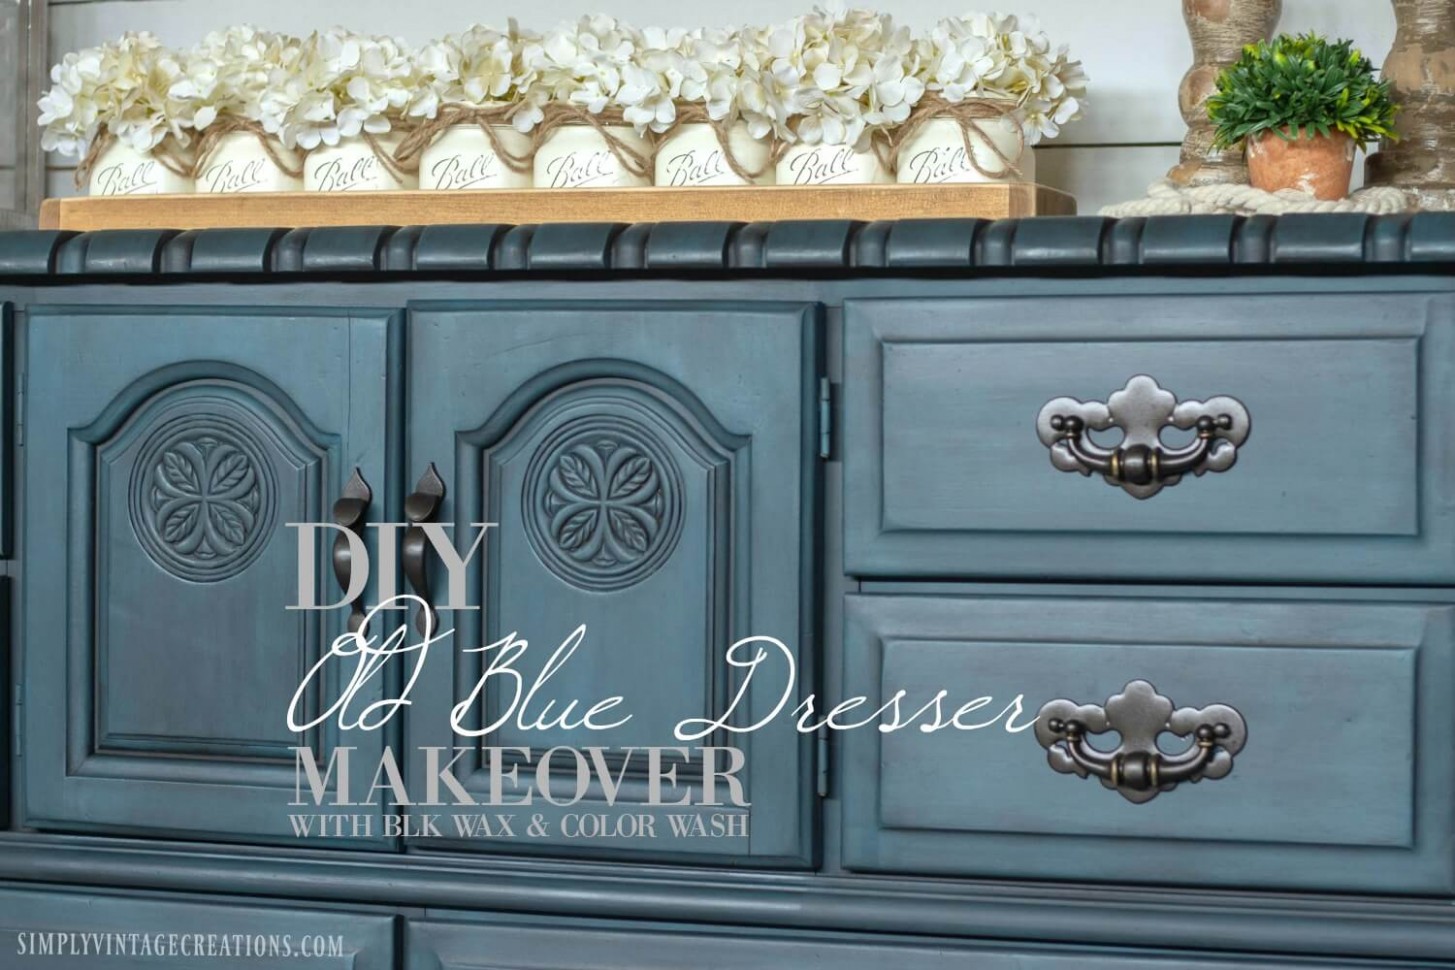 Diy Blue Dresser Makeover W/ Black Wax & Color Wash Where To Buy Annie Sloan Chalk Paint In Machusetts